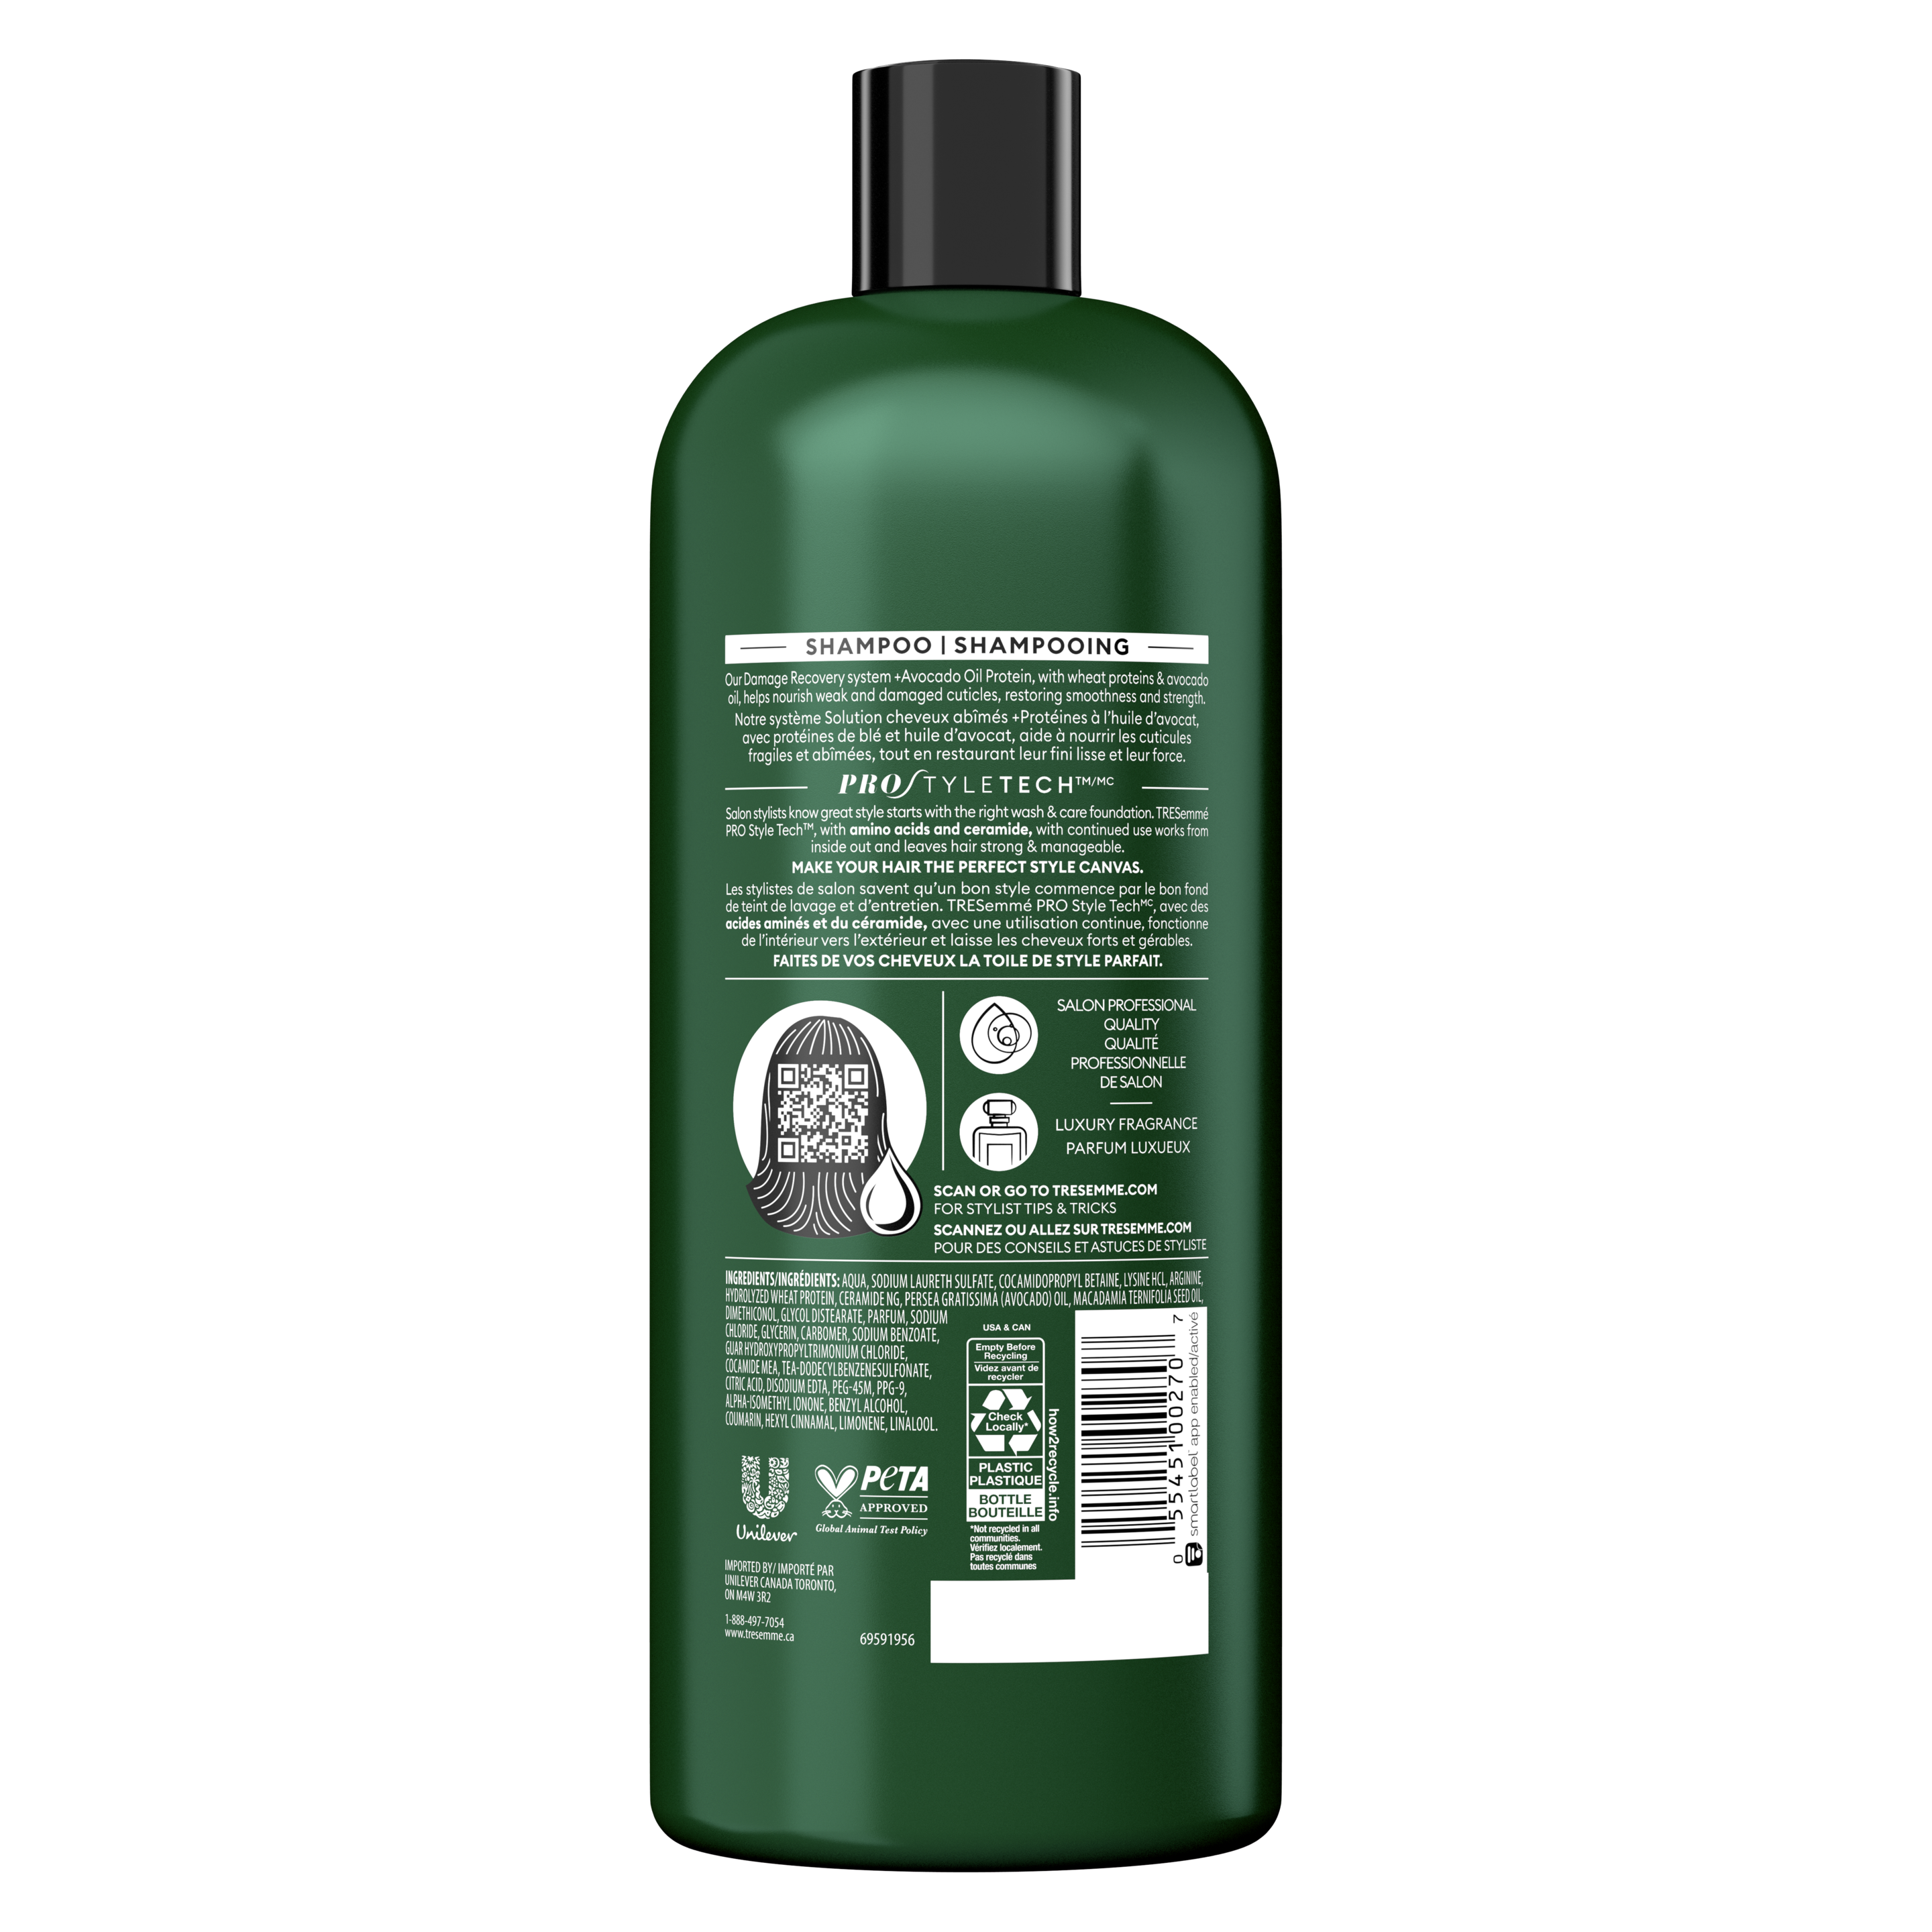 Botanique Damage and Recovery Shampoo for Damaged Hair